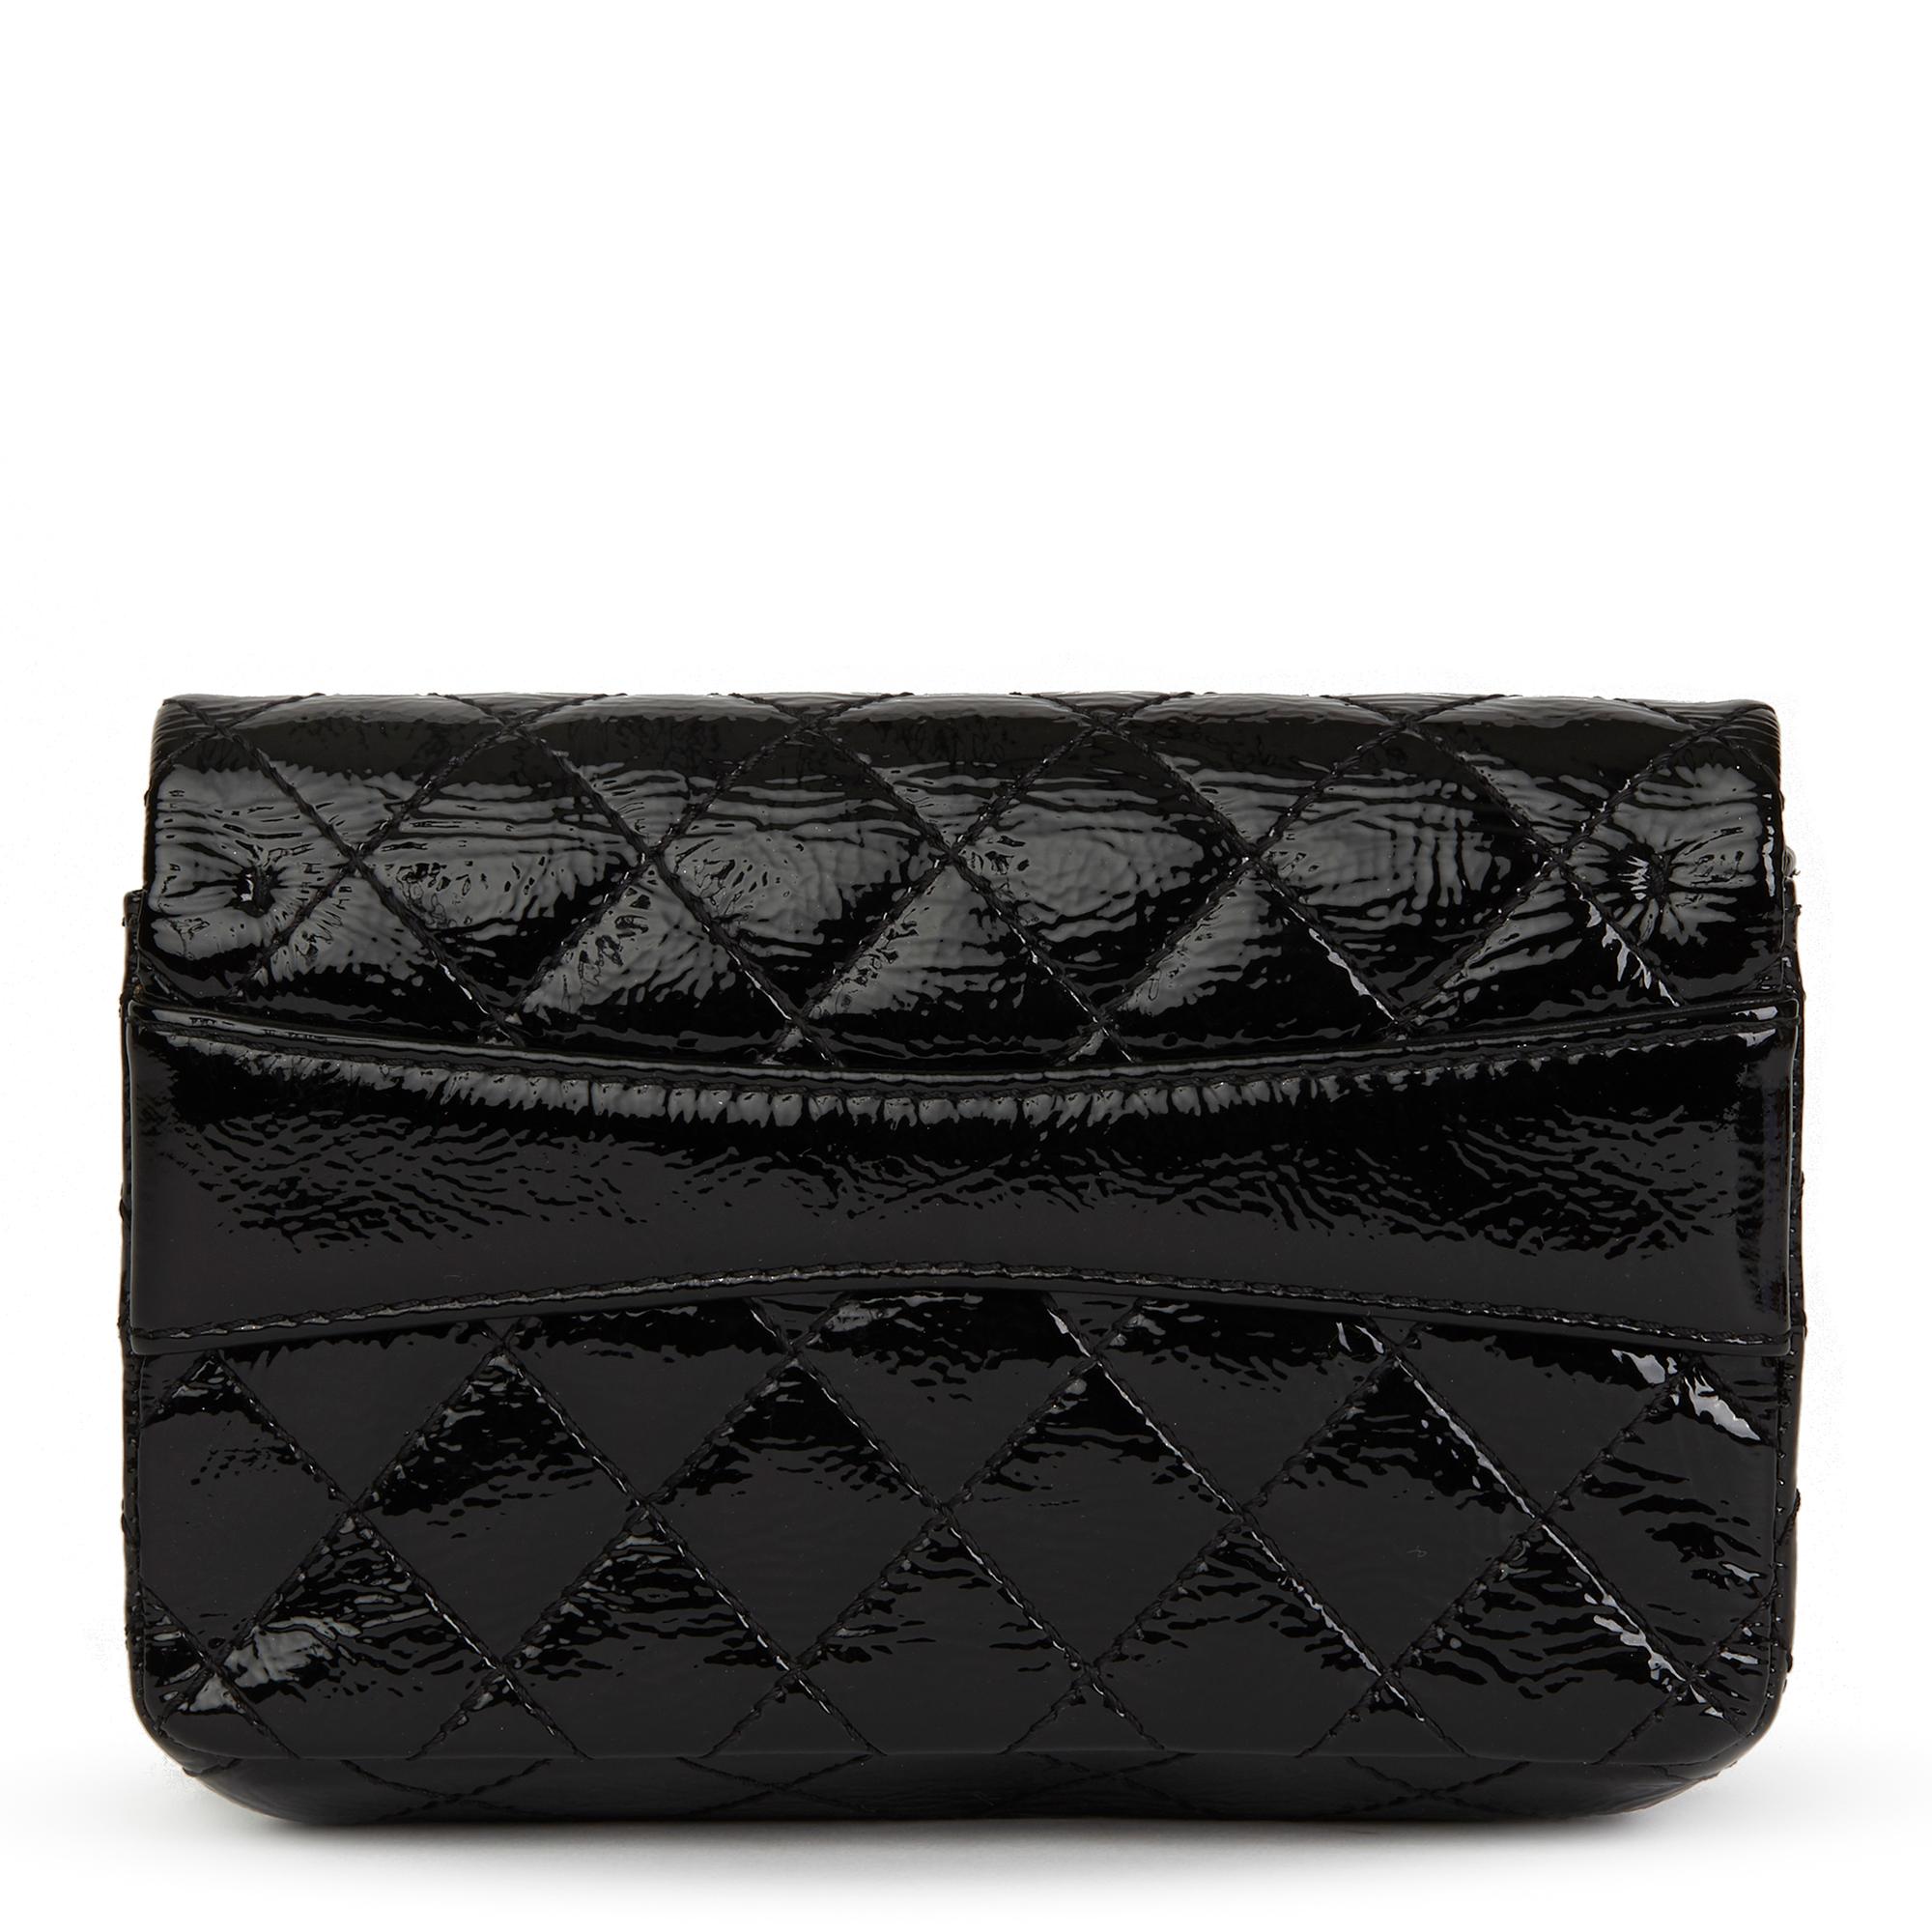 Women's 2007 Chanel Black Quilted Aged Patent Leather 2.55 Reissue Clutch